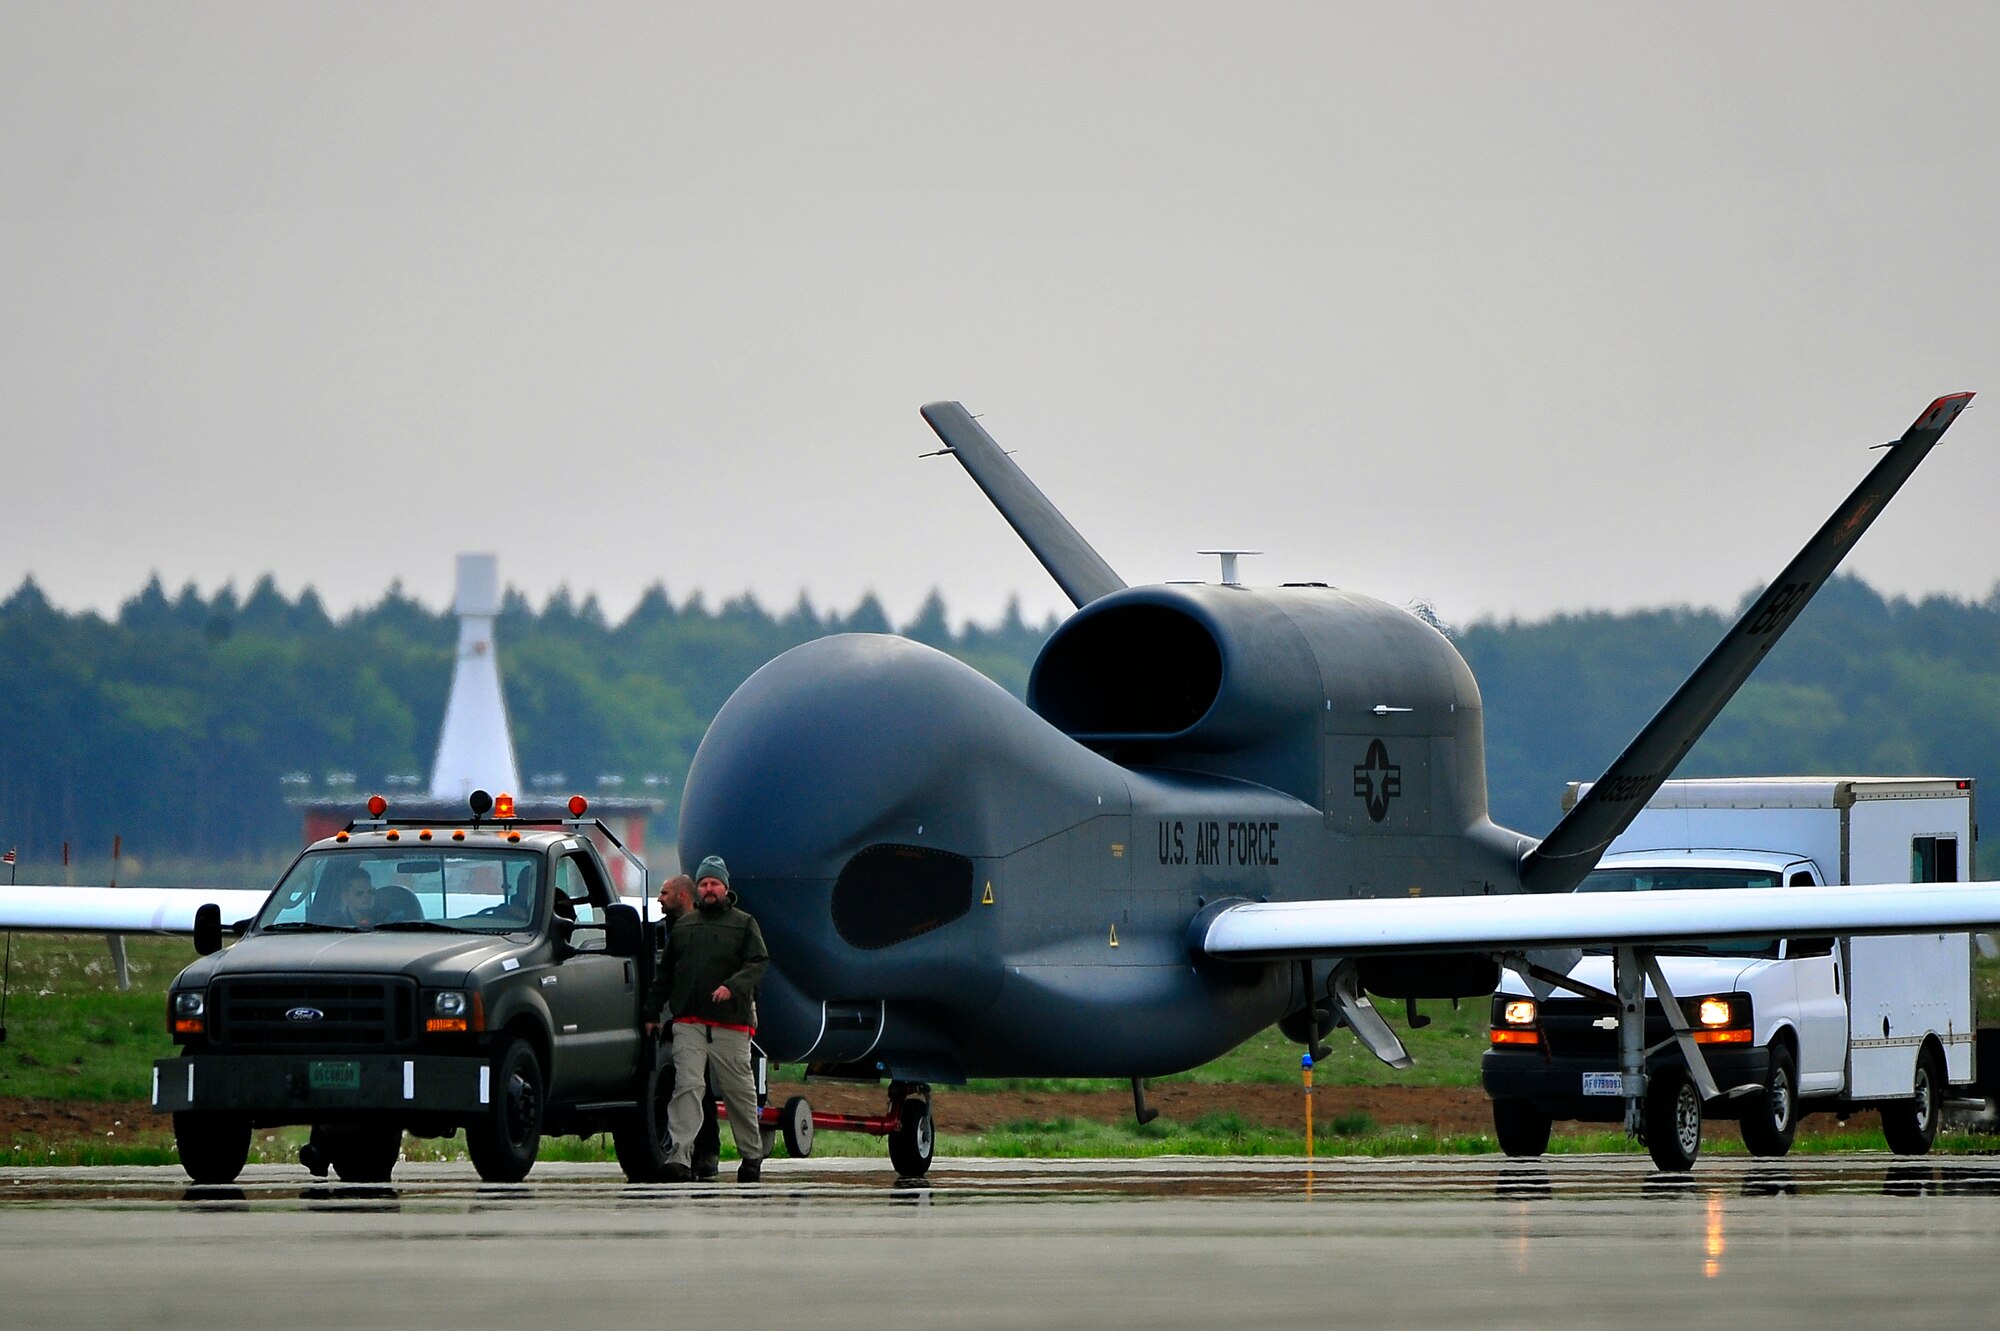 An RQ-4 Global Hawk from Andersen Air Force Base, Guam is towed down the taxiway at Misawa Air Base, Japan, May 24, 2014. The RQ-4 Global Hawk is a high-altitude, long-endurance unmanned aircraft system with an integrated sensor suite that provides intelligence, surveillance and reconnaissance, or ISR, capability worldwide. (U.S. Air Force photo/Staff Sgt. Nathan Lipscomb)